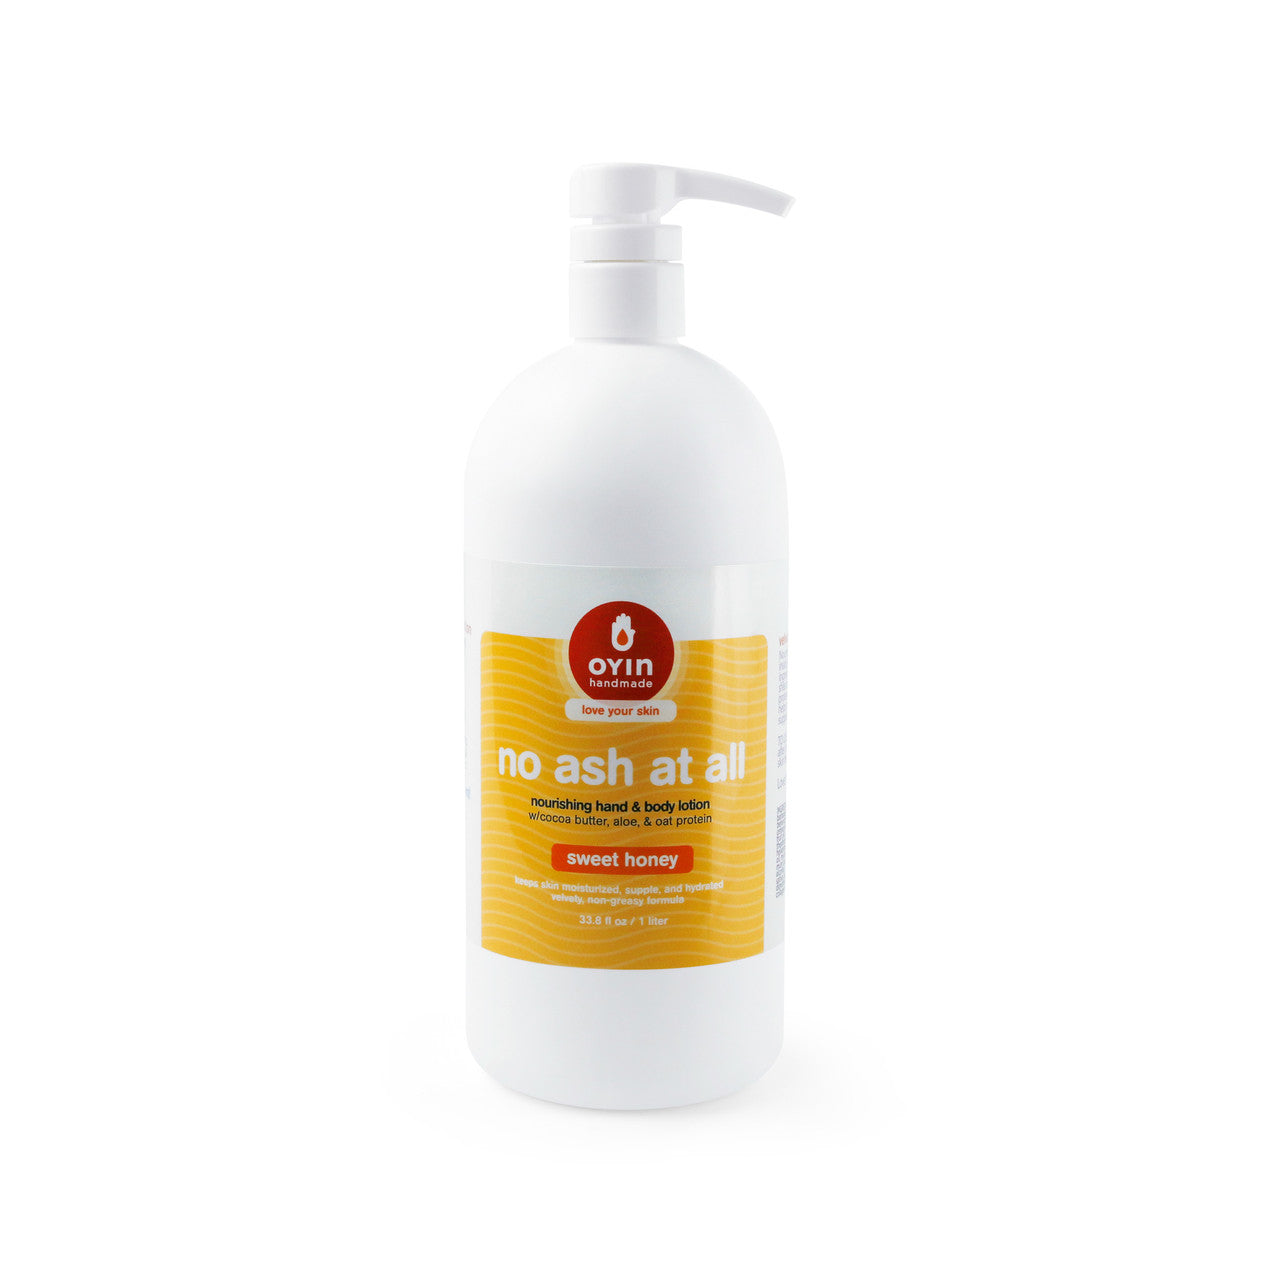 No Ash At All - cocoa butter lotion in a 32oz stock up bottle with pump